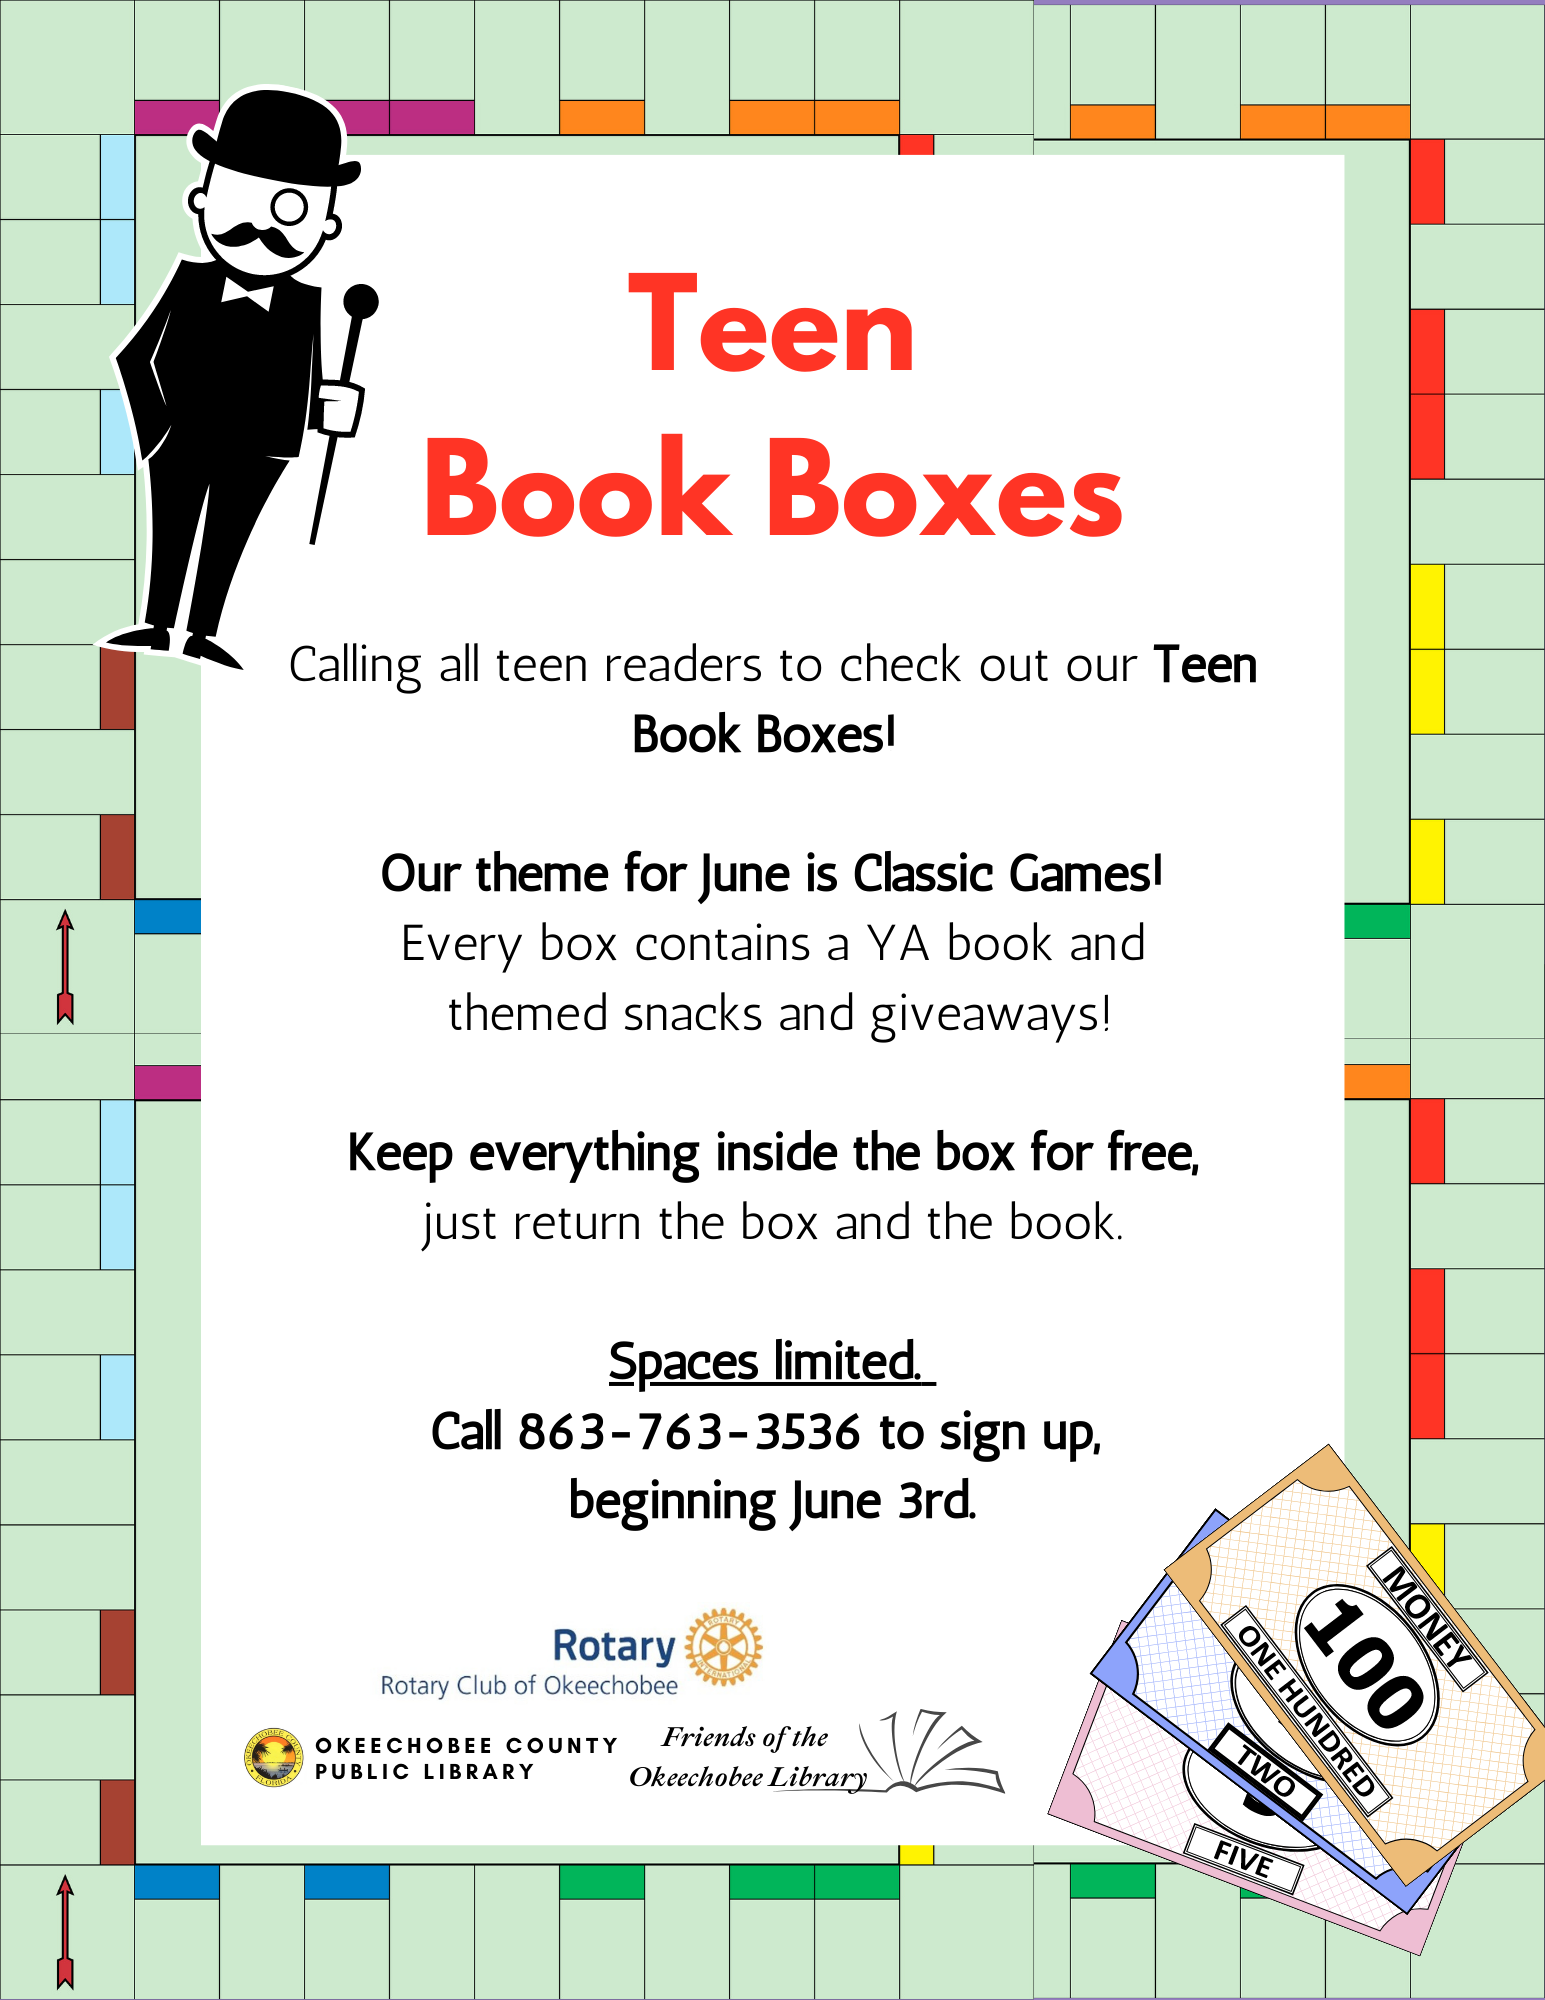 June Teen Book Boxes! Open to all teens, get free prizes and snacks just for checking out a book!